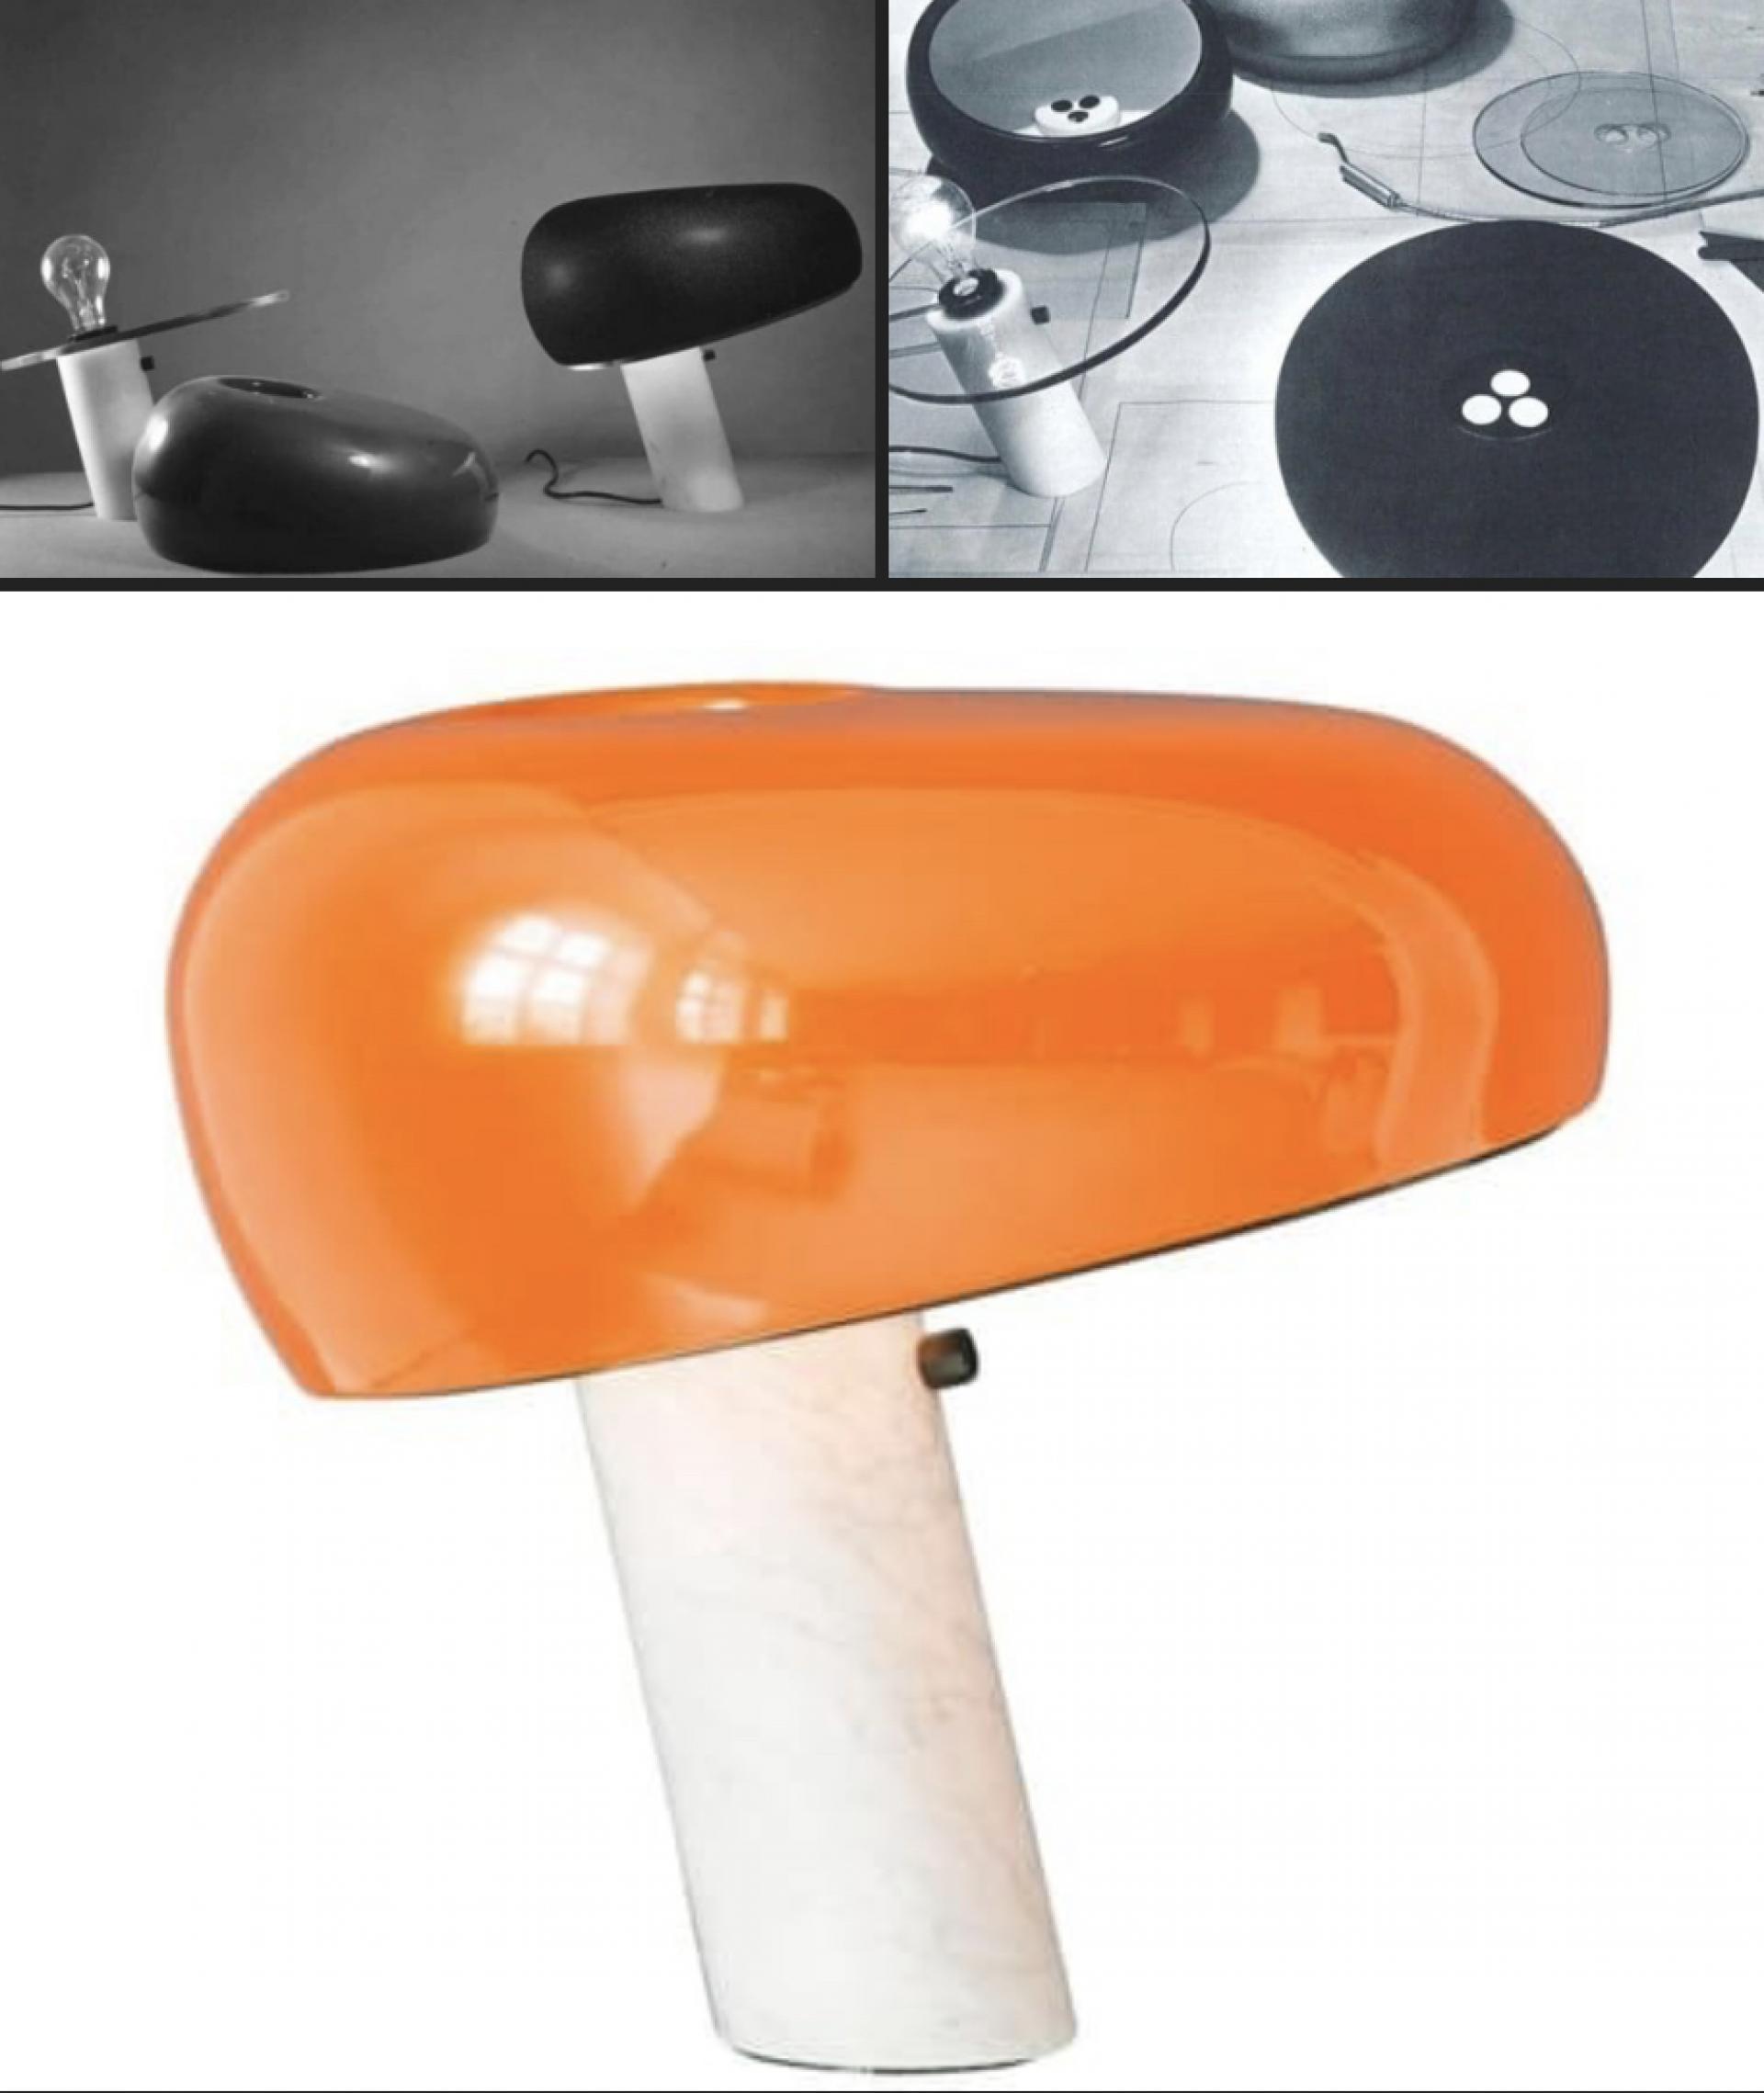 Components of the Snoopy table lamp.